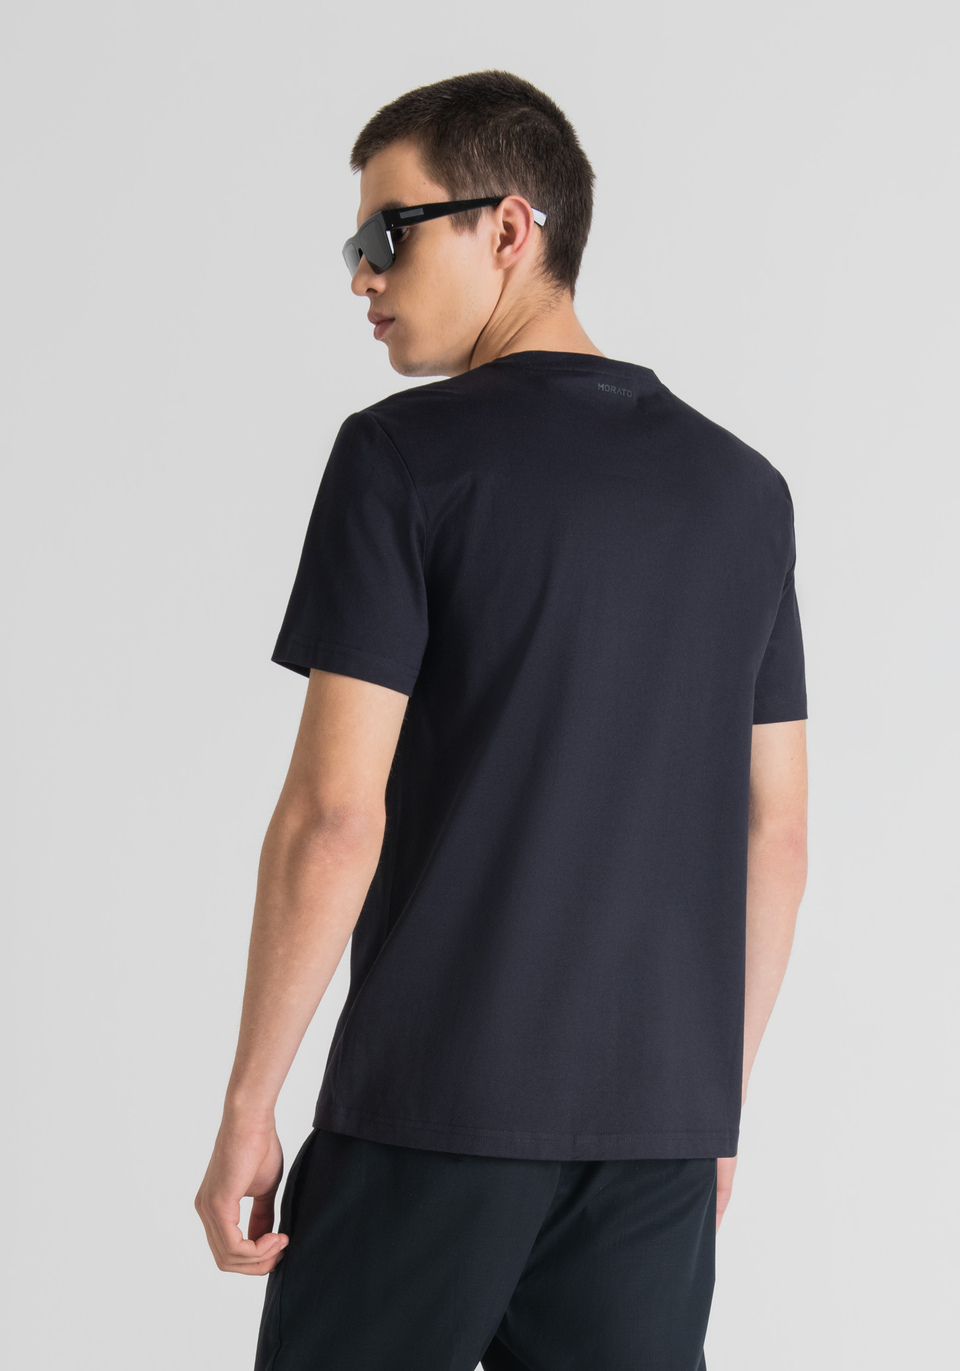 SLIM FIT T-SHIRT IN PURE COTTON WITH TIGER PRINT - Antony Morato Online Shop